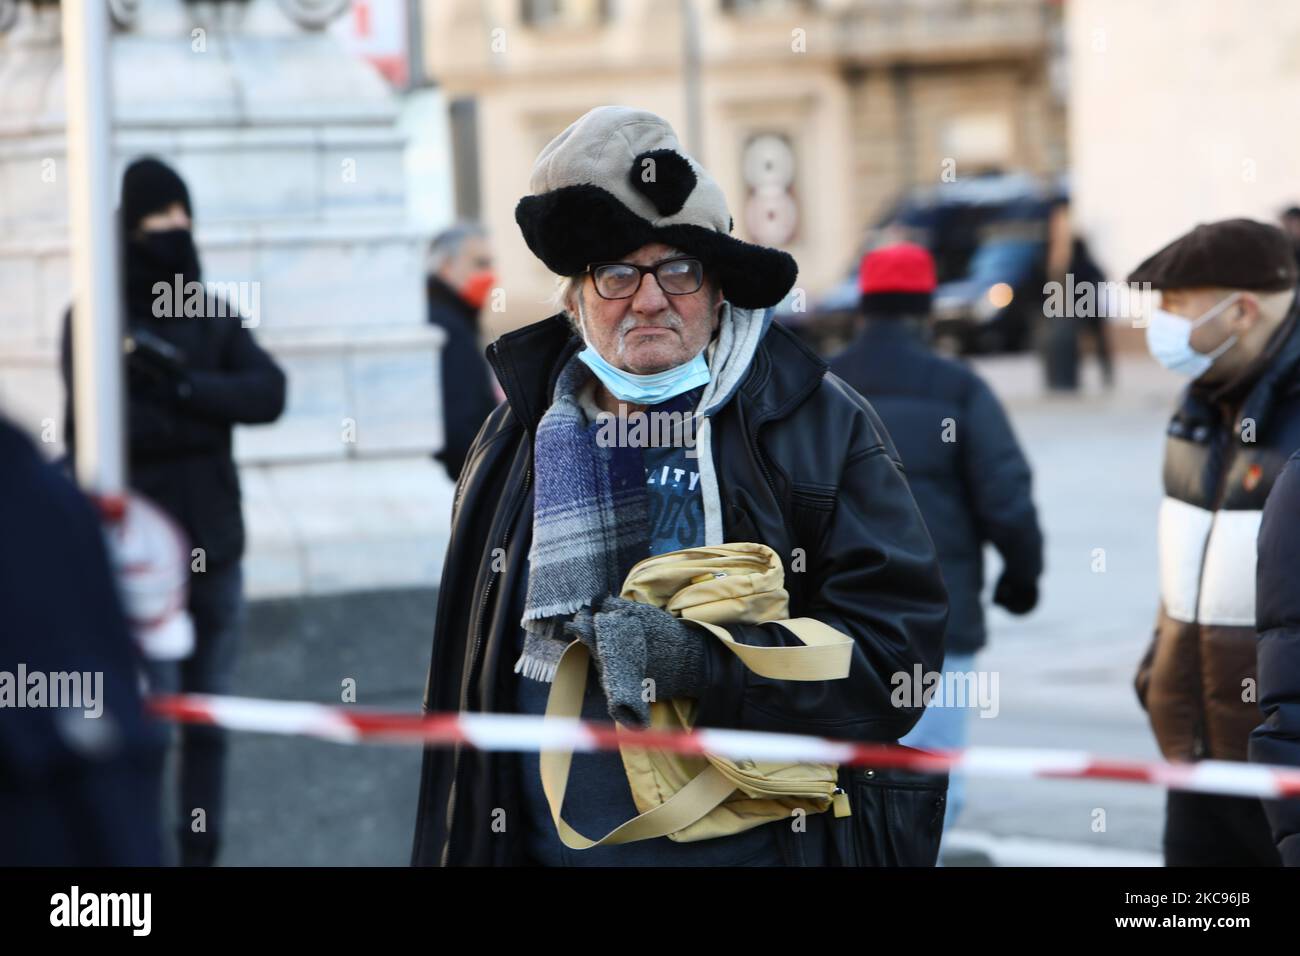 Protest rally of the gilet arancioni deniers against the Italian restrictions for the Coronavirus emergency captained by the leader Antonio Pappalardo in Piazza Duomo, Milano, Italy, on February 13 2021 (Photo by Mairo Cinquetti/NurPhoto) Stock Photo